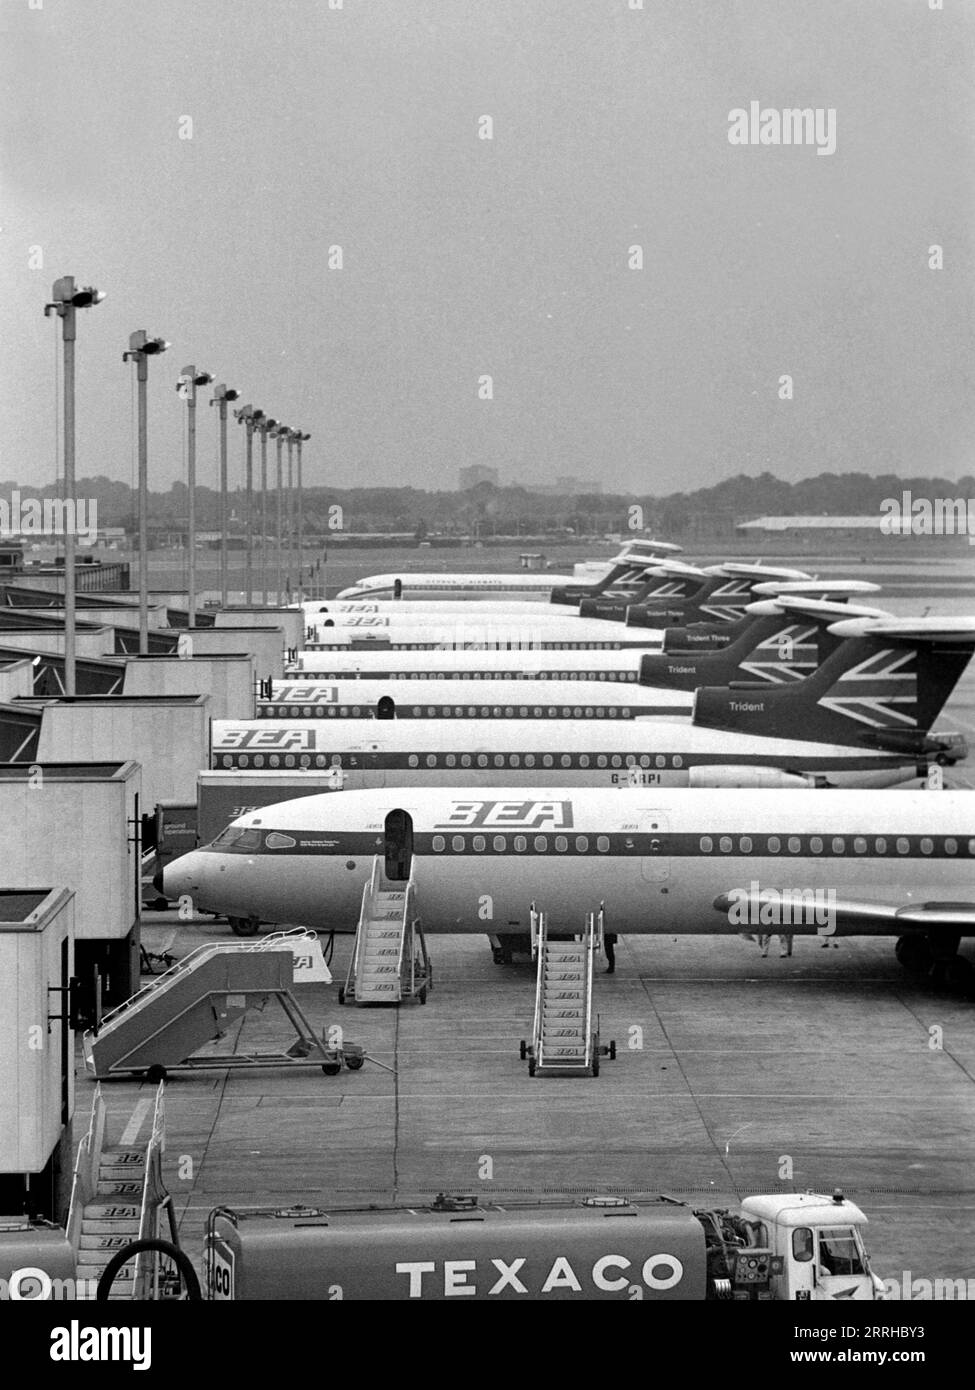 BEA (British European Airlines) Hawker Siddeley HS-121 'Trident' jets, Heathrow Airport, London, England 1971.                                           The second plane in this row, G-ARPI, crashed near Heathrow in June 1972, killing all 118 people on board. Stock Photo